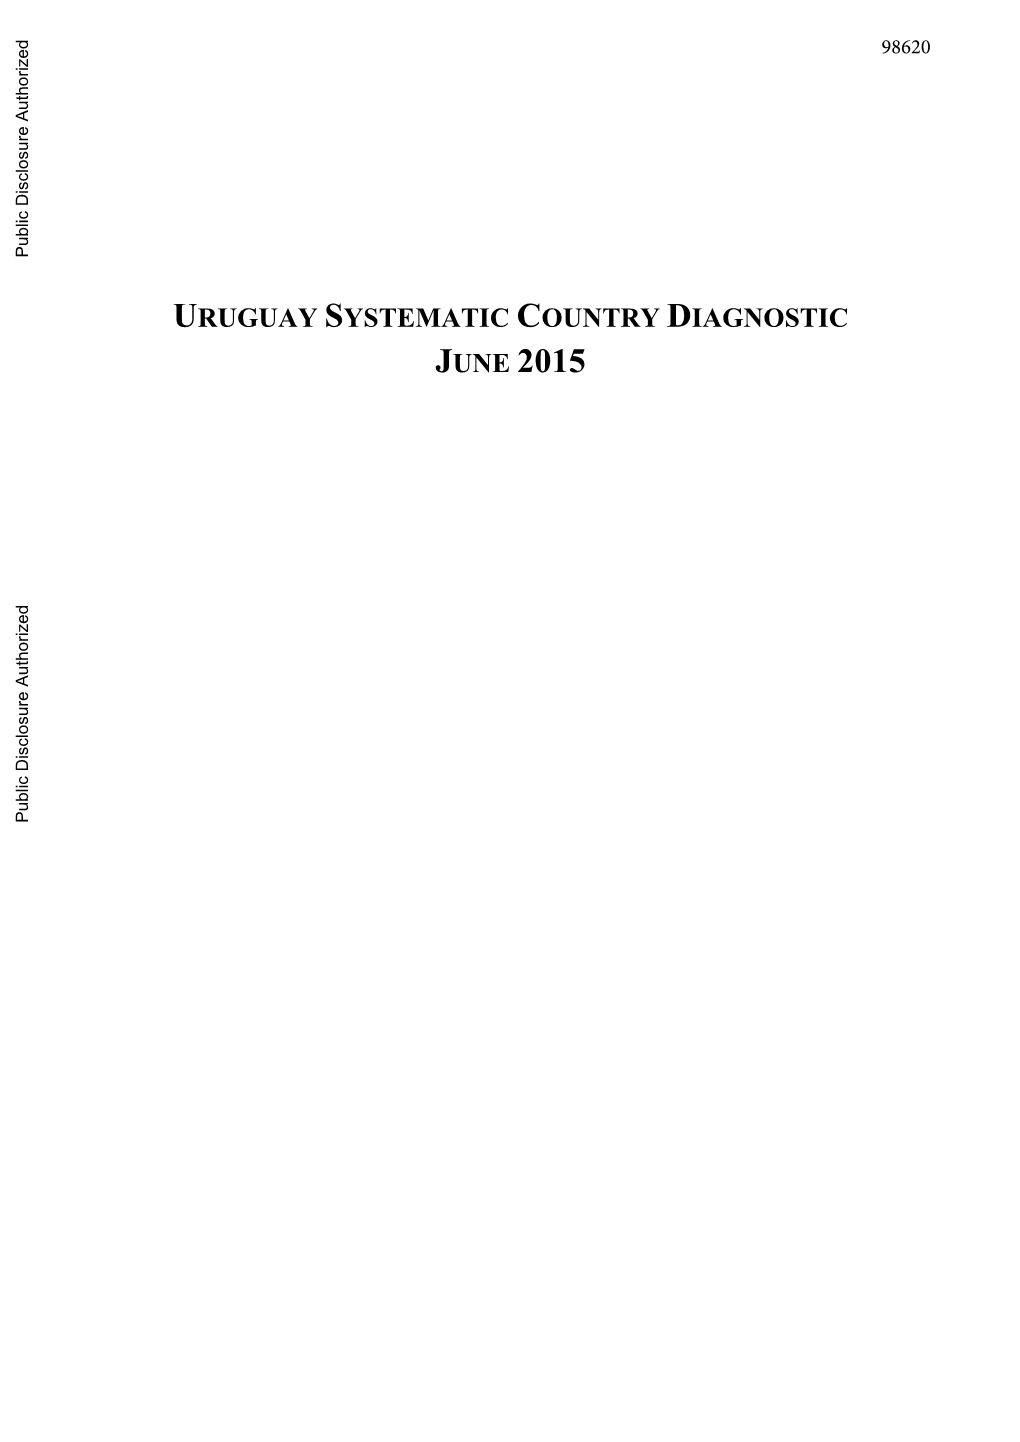 URUGUAY SYSTEMATIC COUNTRY DIAGNOSTIC JUNE 2015 Public Disclosure Authorized Public Disclosure Authorized Public Disclosure Authorized ACKNOWLEDGMENTS